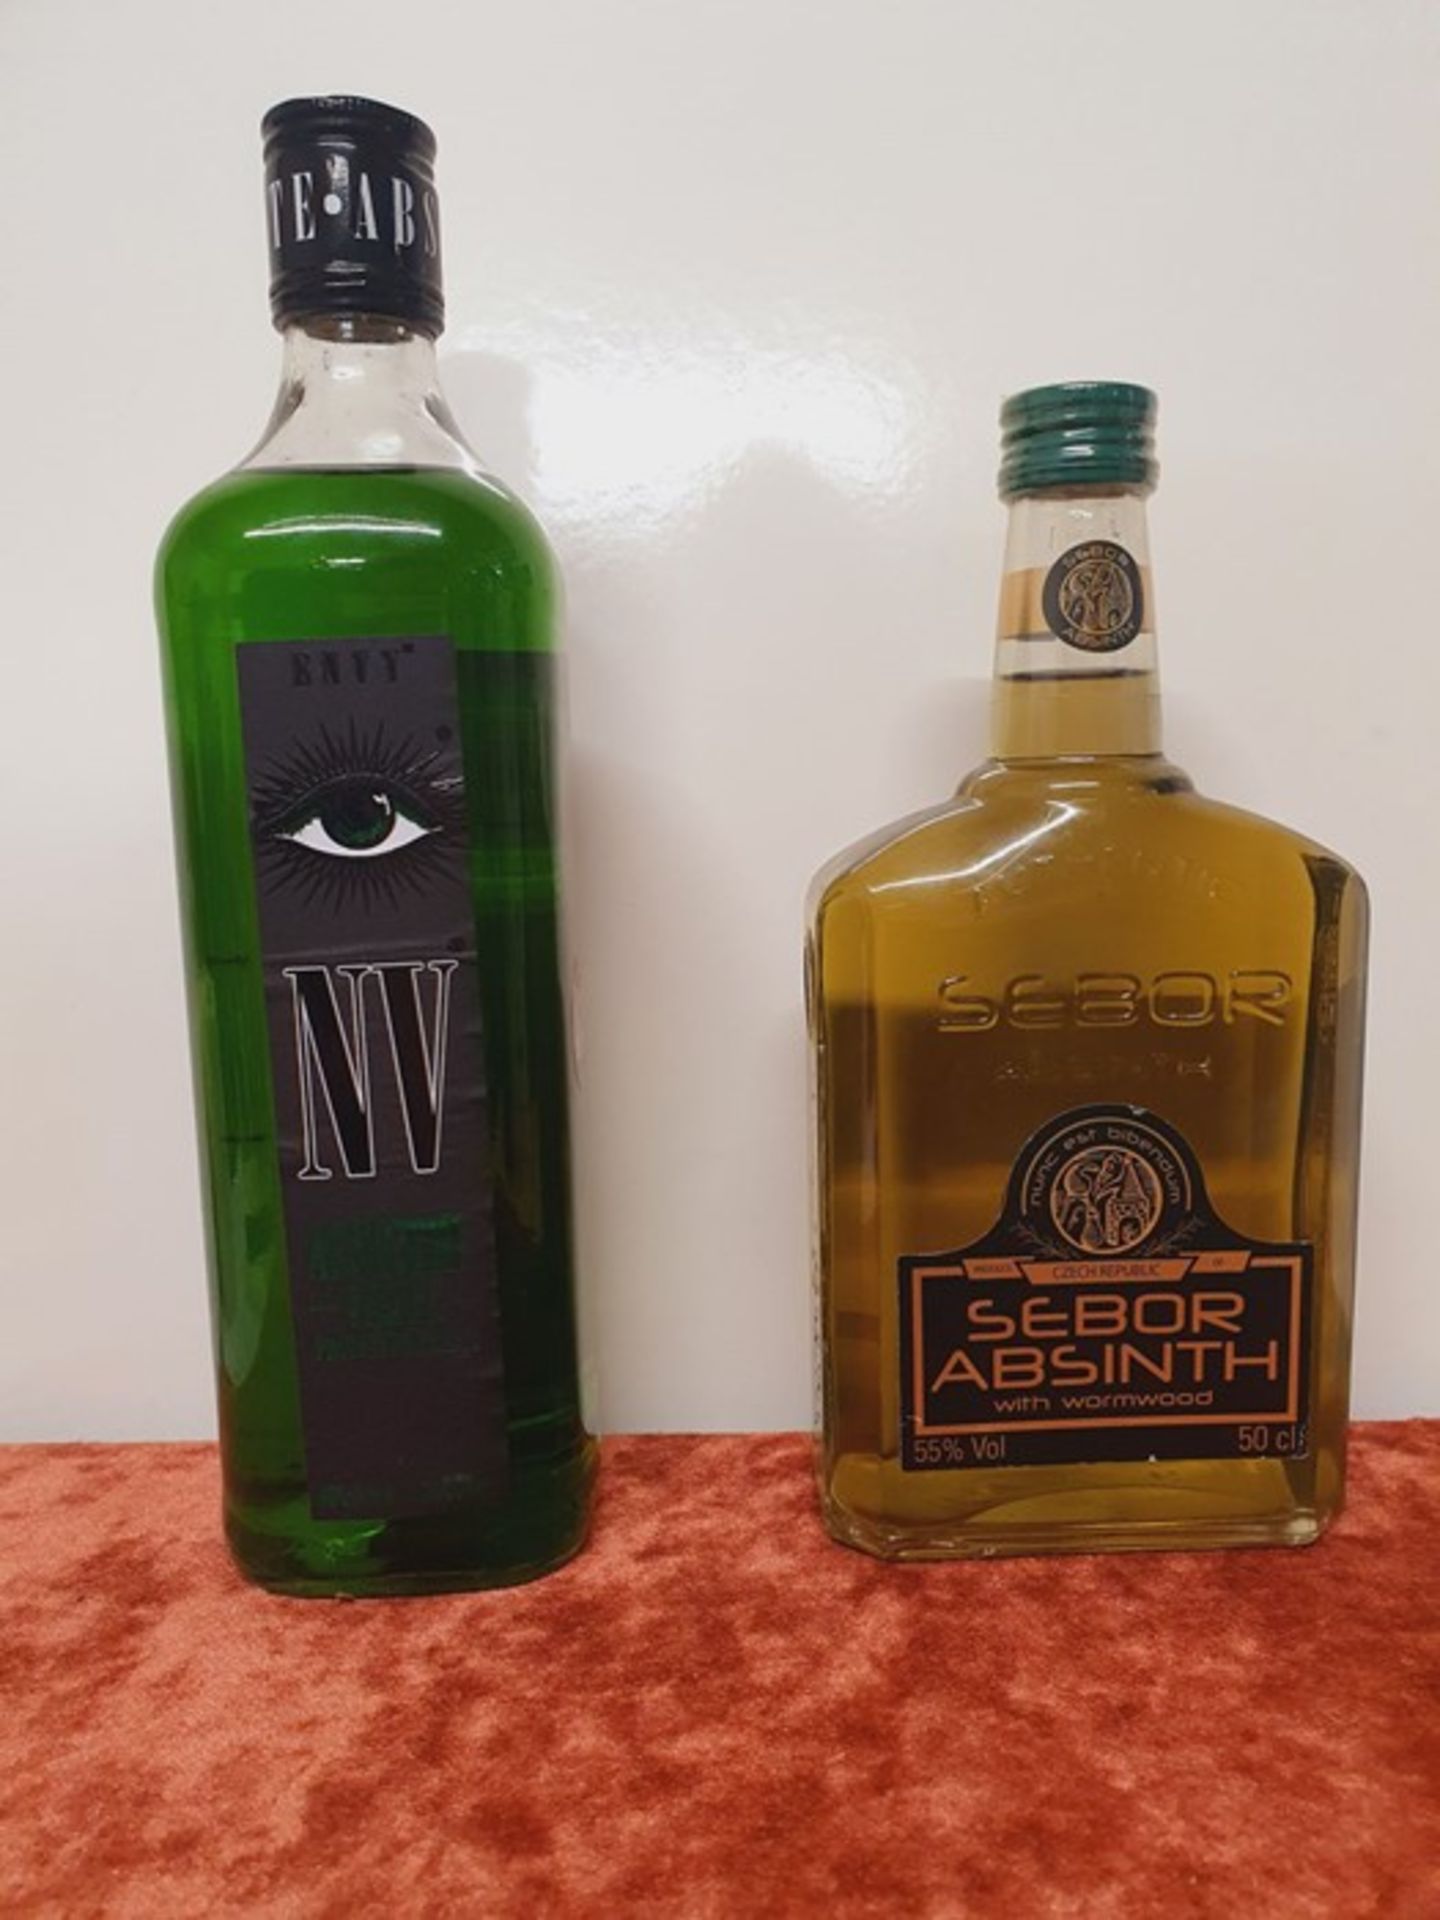 ONE LOT TO CONTAIN 1 x NV ABSINTHE VERTE 70CL / 1 x SEBOR ABSINTH WITH WORMWOOD 50CL